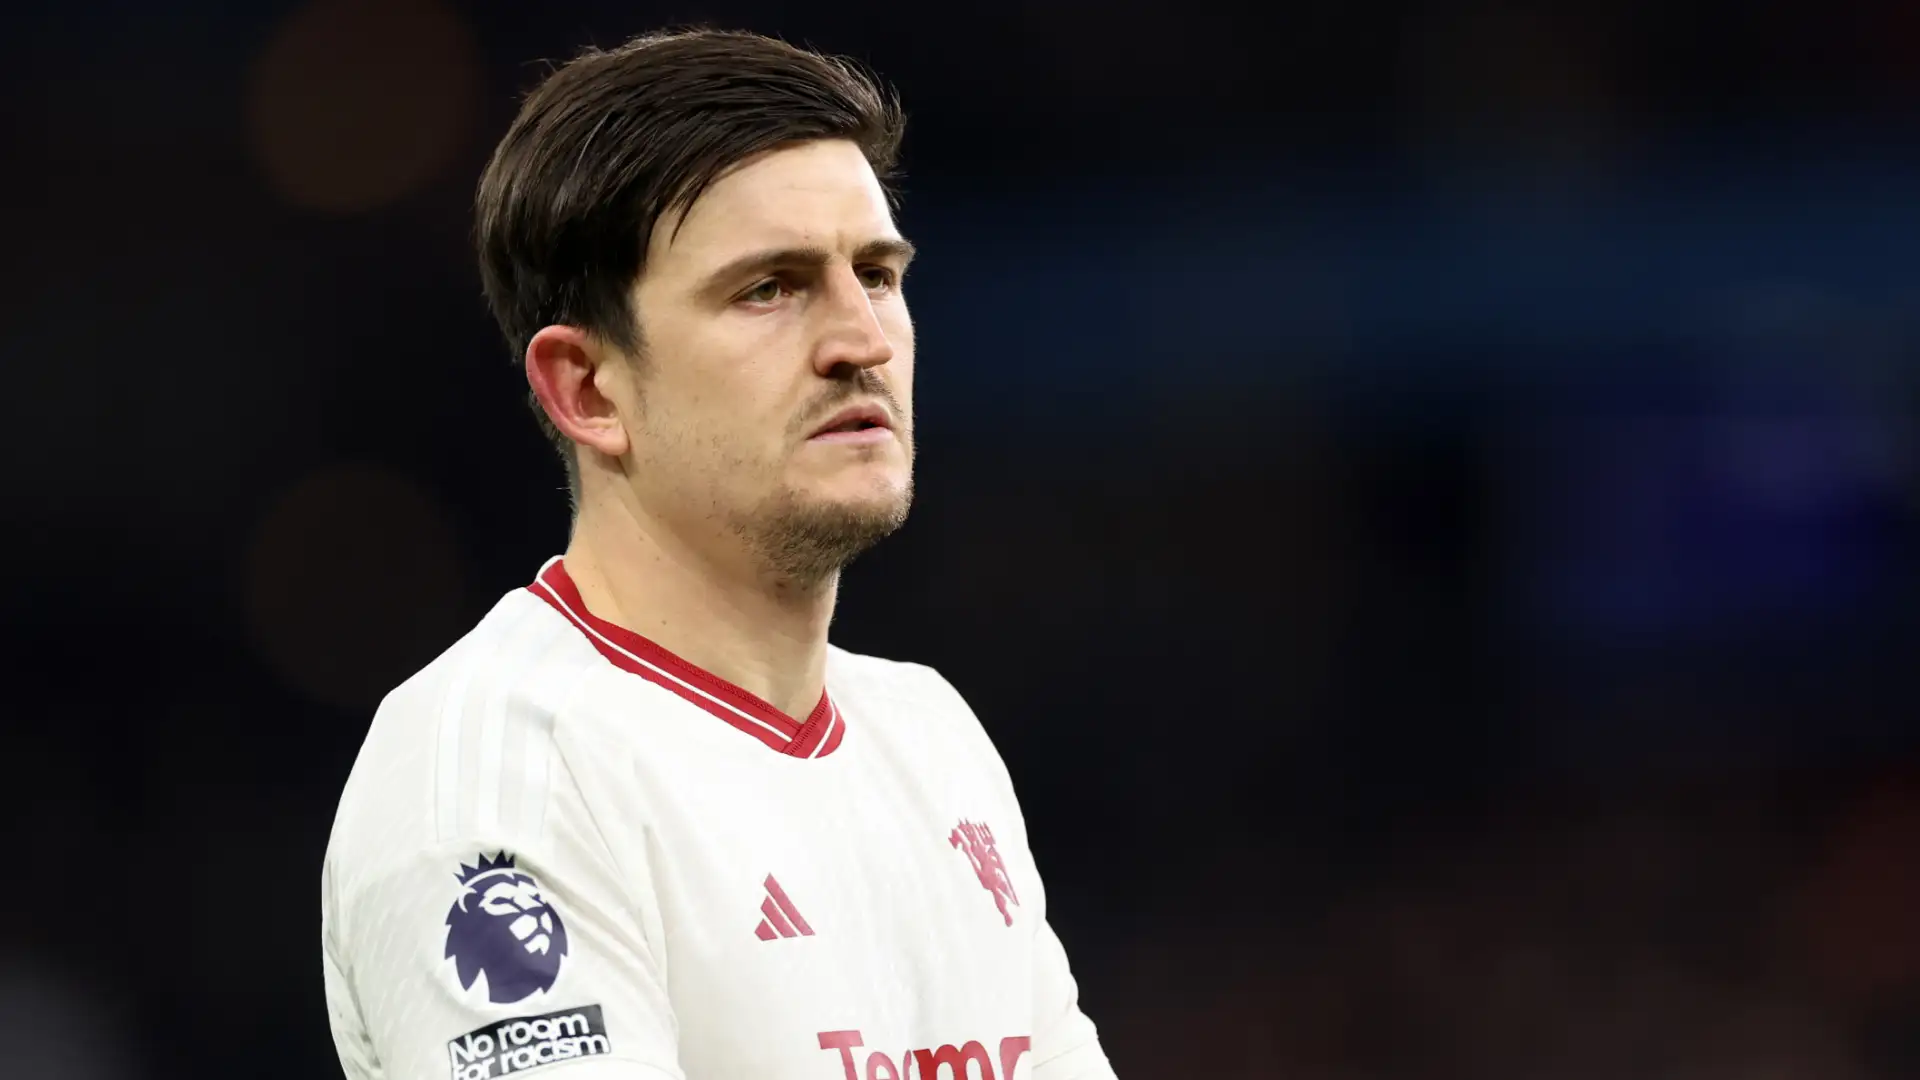 'Gutted' Harry Maguire sends message to Man Utd after being ruled out of FA Cup final through injury